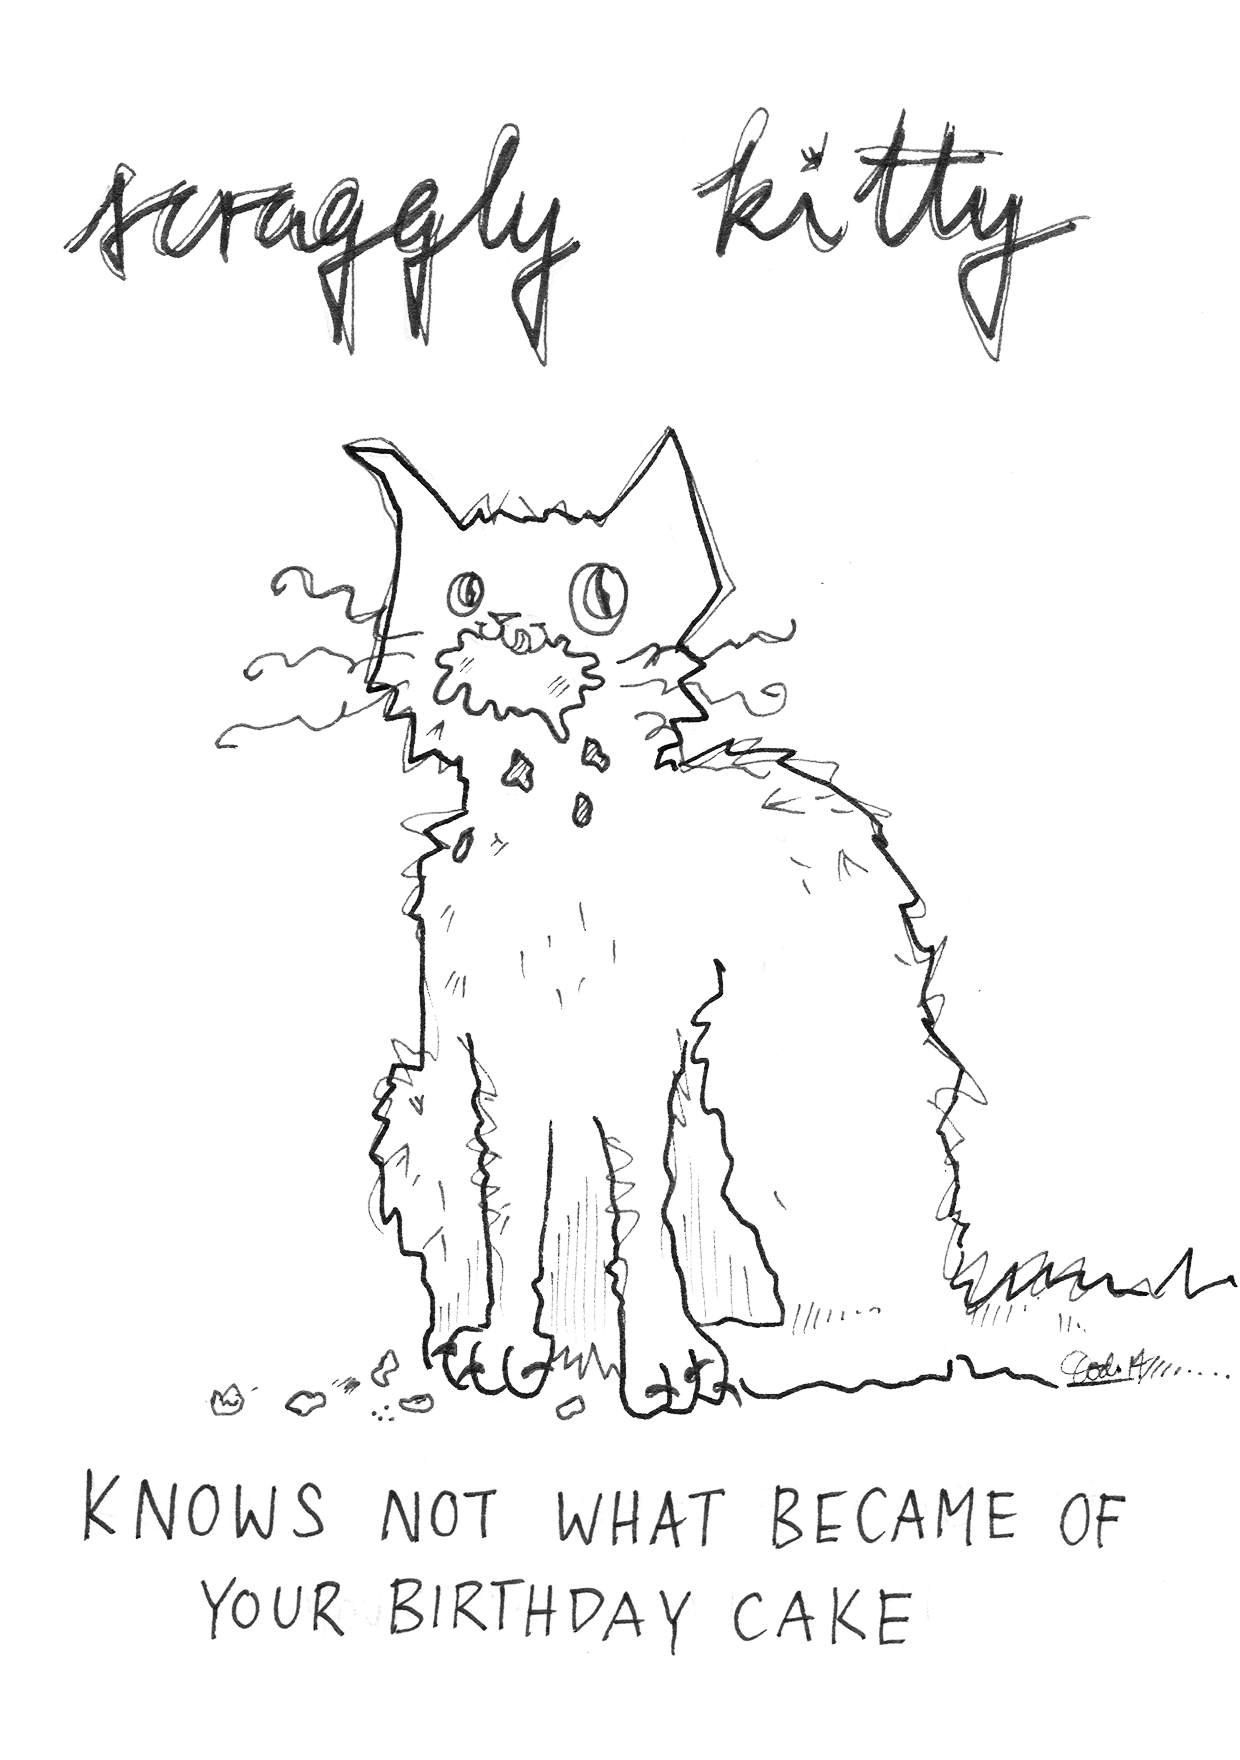 Scraggly Kitty Knows Not What Became Of Your Birthday Cake Greeting Card